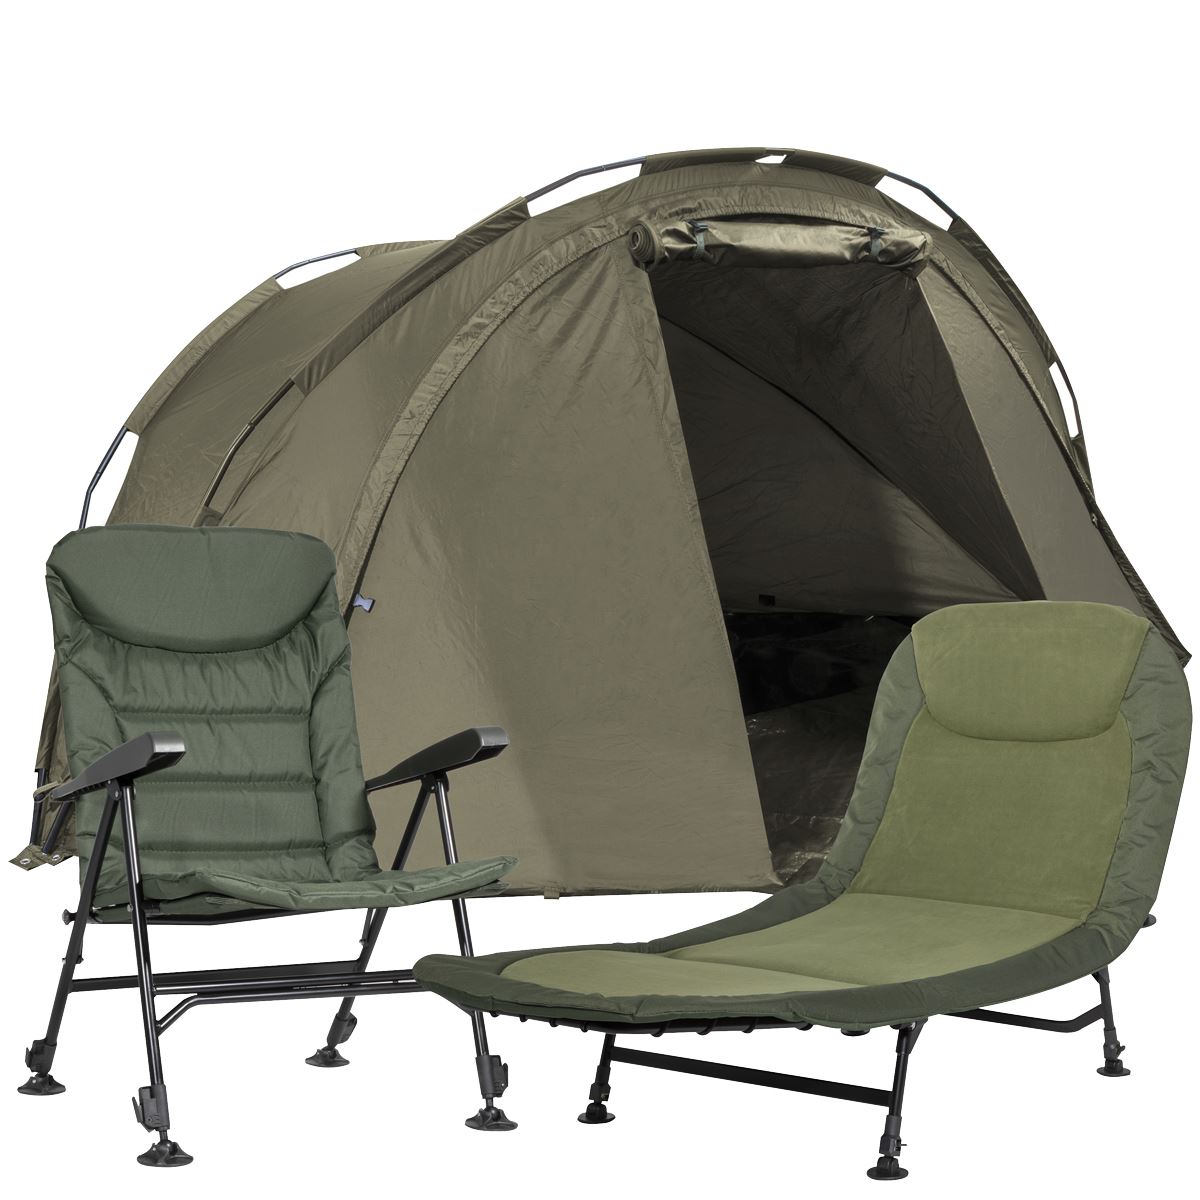 Dellonda Fishing Bivvy Carp Tent Lightweight 2-Man Waterproof & UV Protection with Fishing/Camping Chair & Adjustable Bedchair